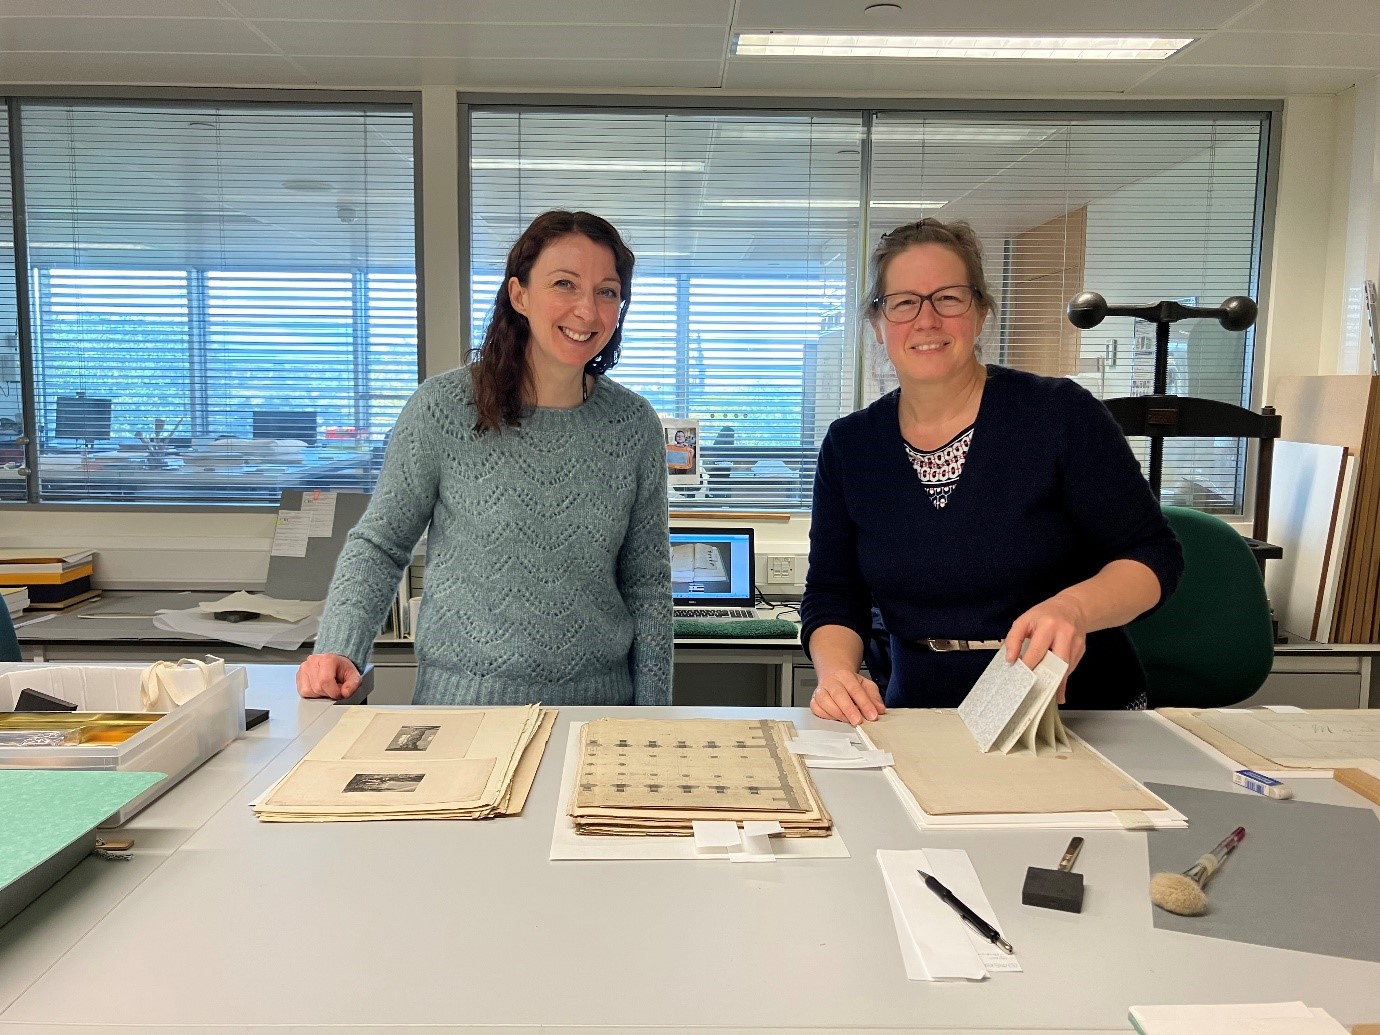 Two women smiling at the camera while working on the manuscript